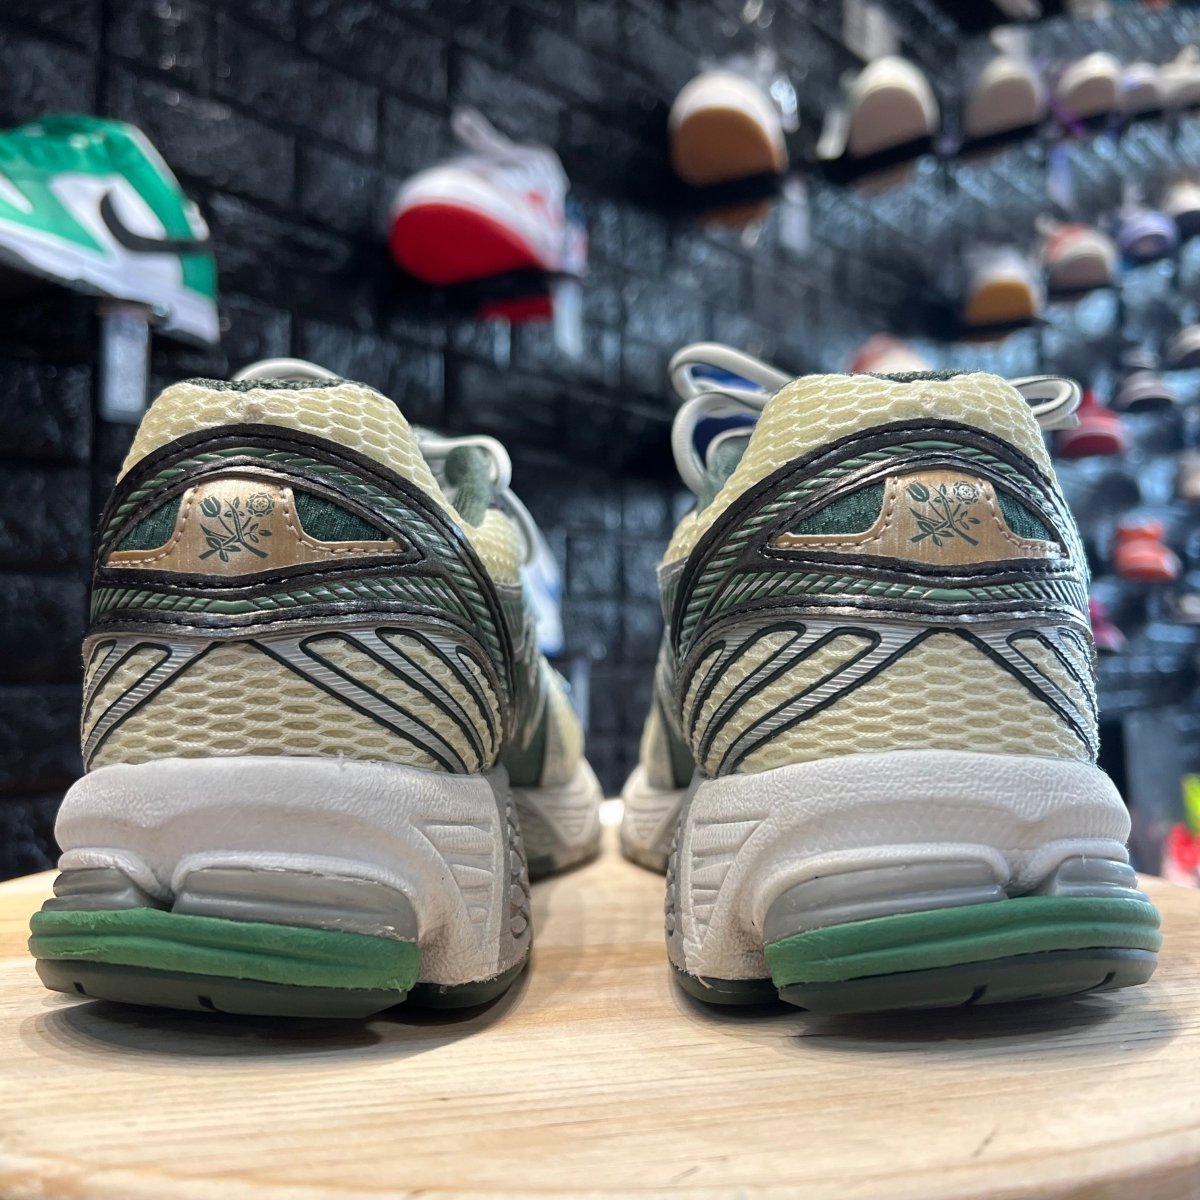 Aimé Leon Dore x 860v2 'Green' - Gently Enjoyed (Used) Men 11.5 - Low Sneaker - New Balance - Jawns on Fire - sneakers